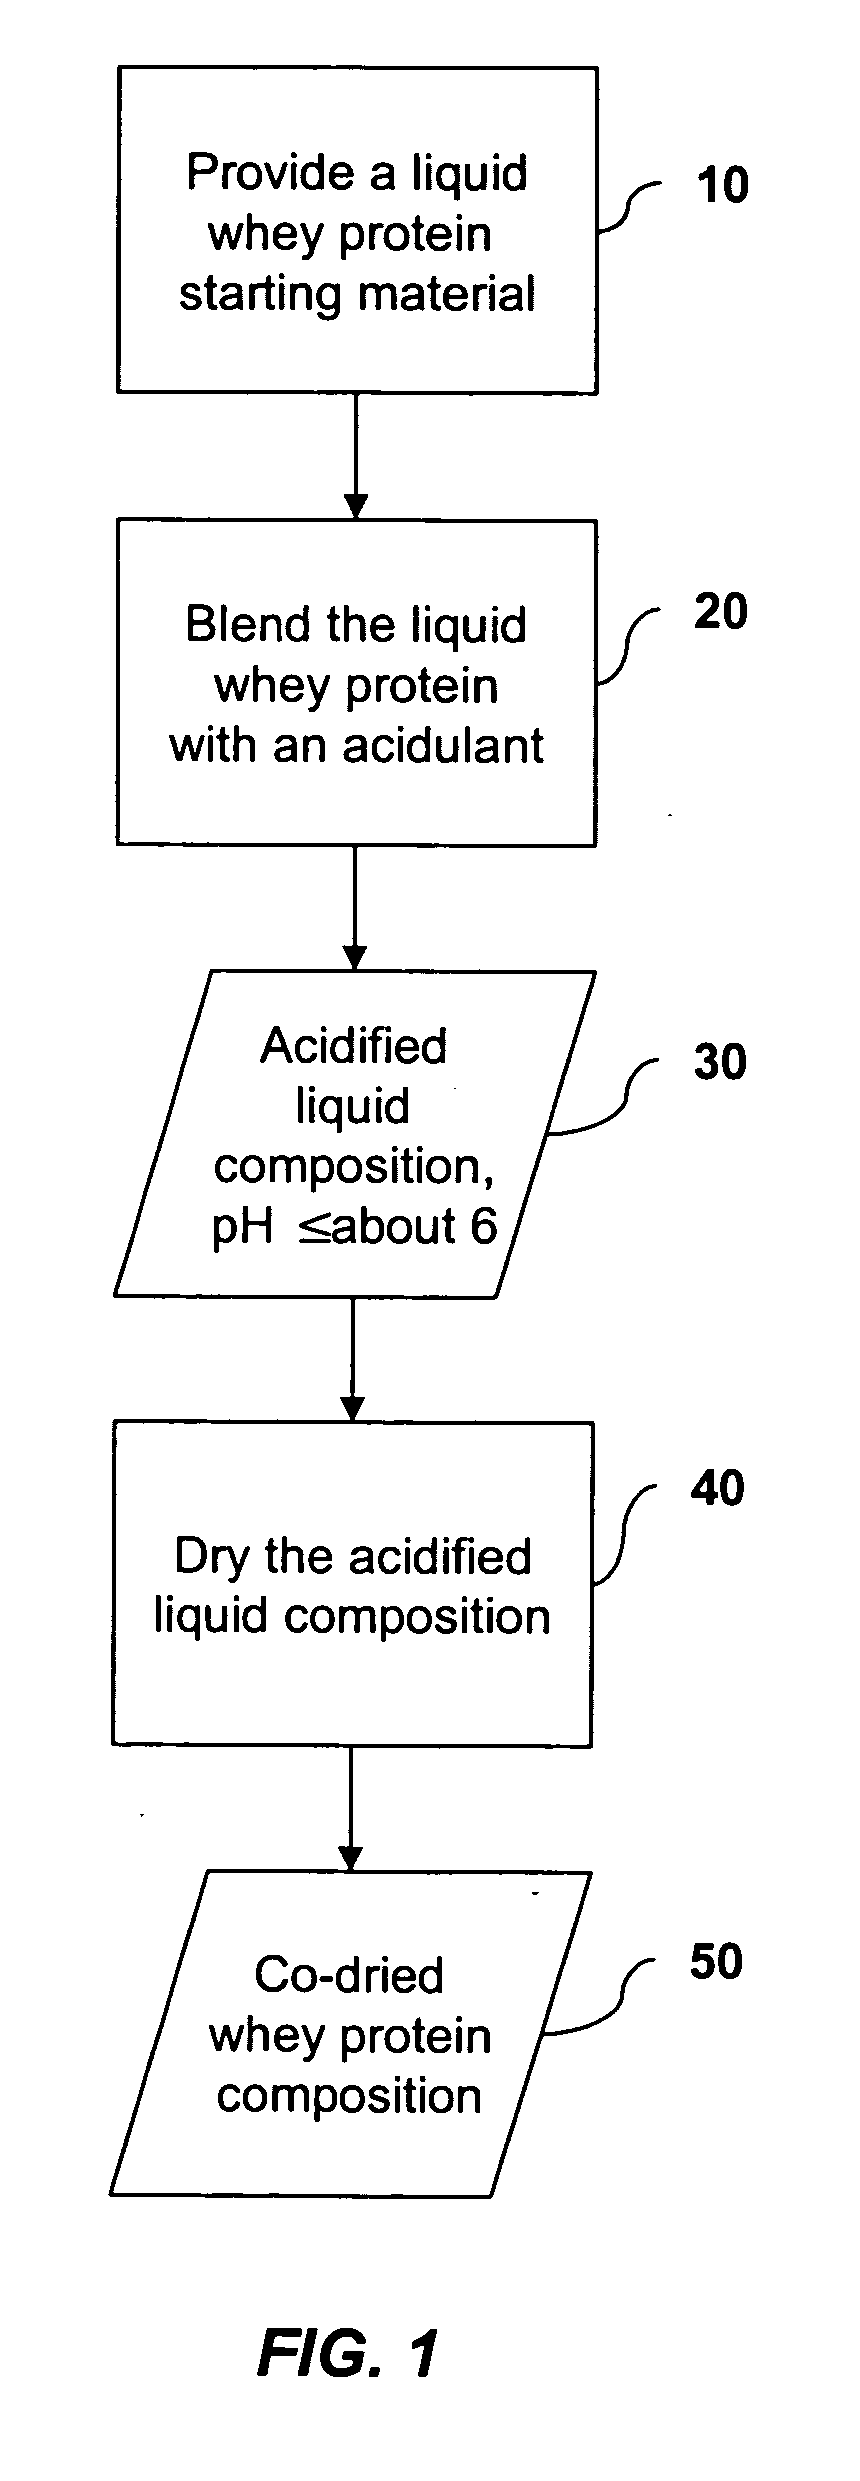 Acidified whey protein compositions and methods for making them